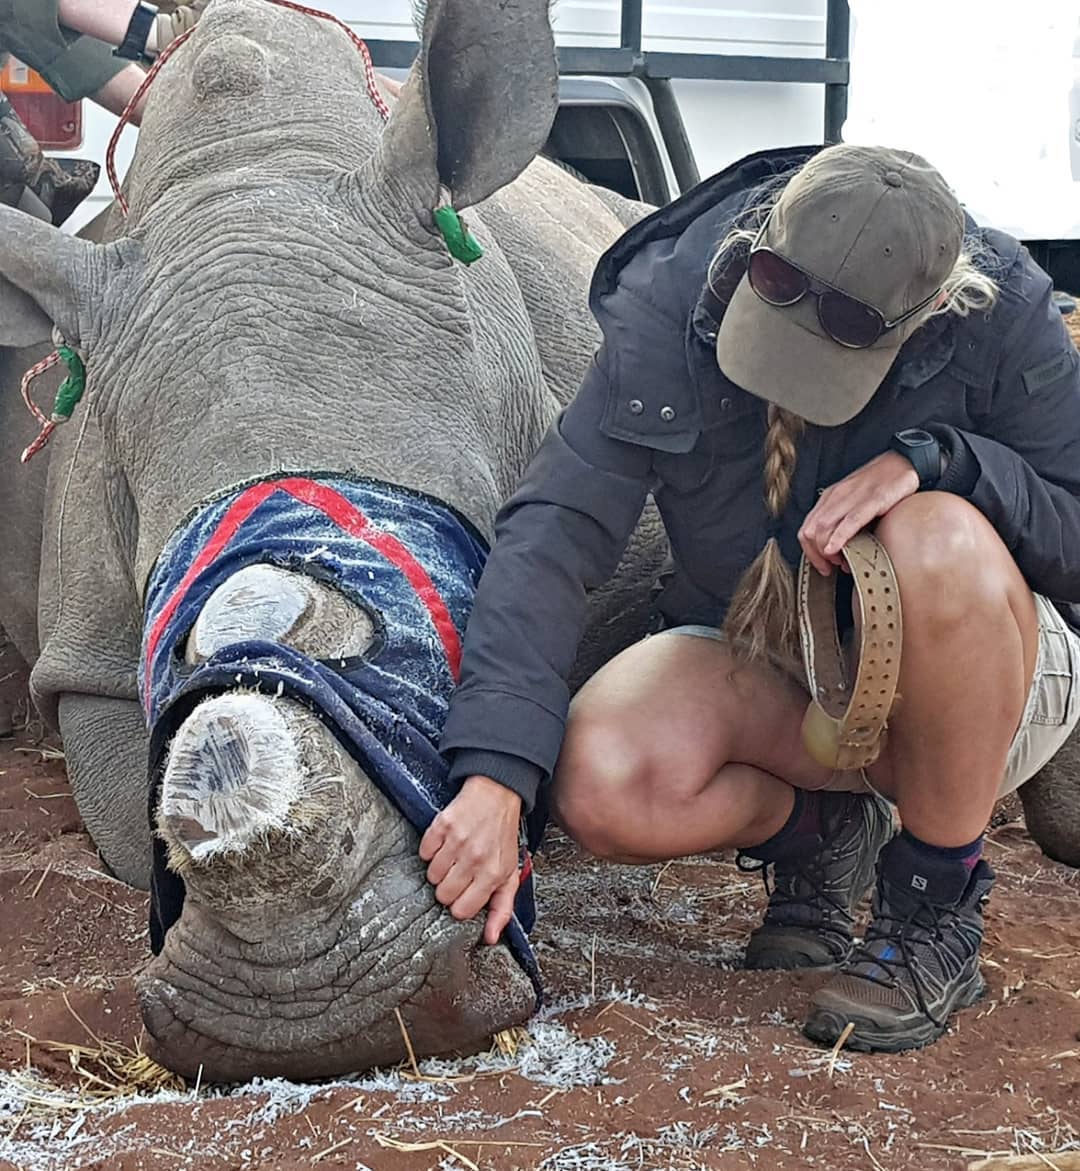 “It’s the greatest precaution you can take,” Tate said. “You can do that without injuring the animals. It’s a surgical procedure. While the rhino is knocked out, their horn is sawed off.”